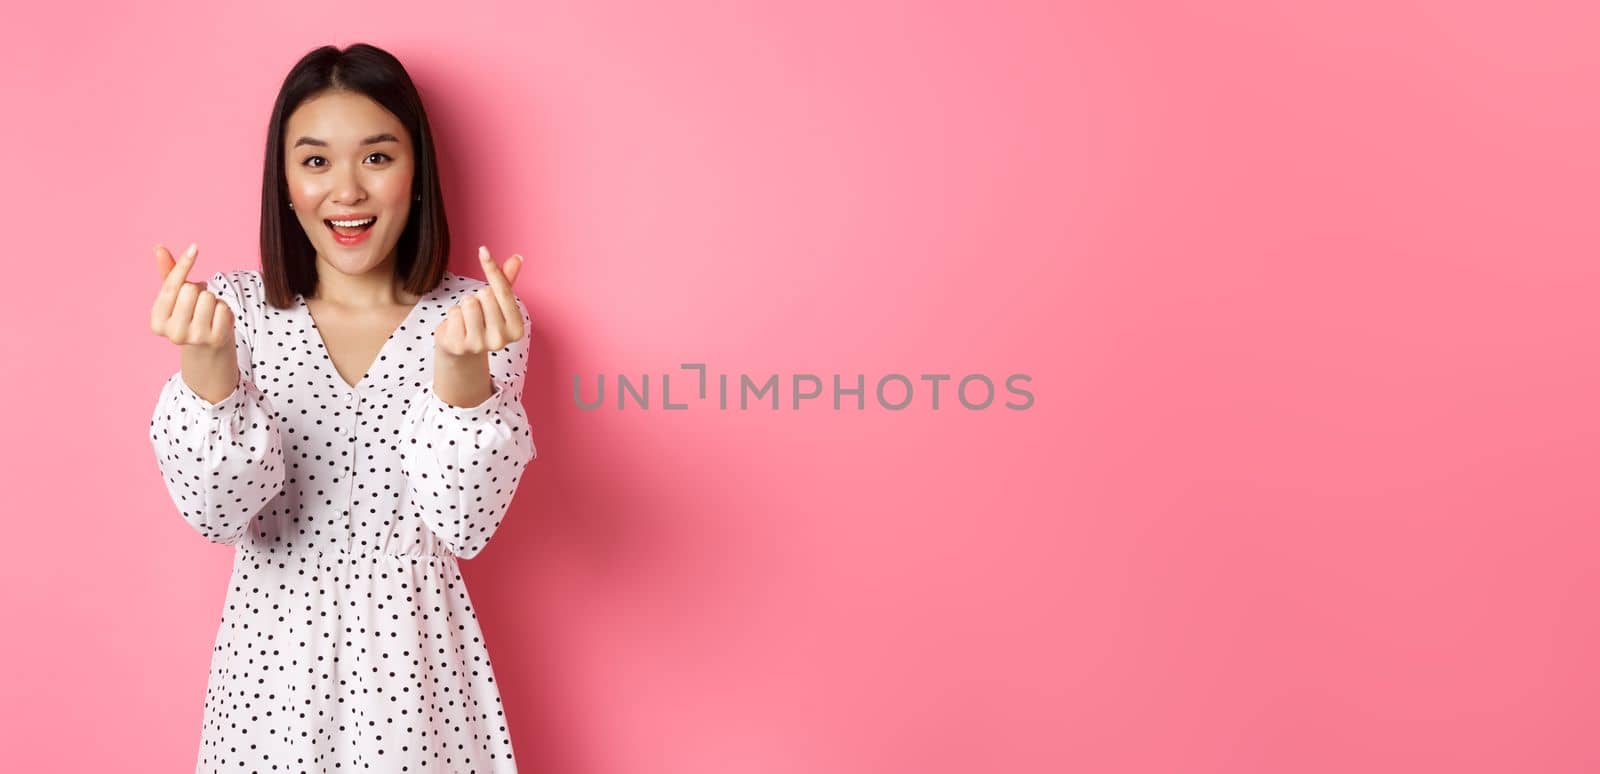 Lovely asian woman in dress showing korean heart signs and smiling, standing on romantic pink background.